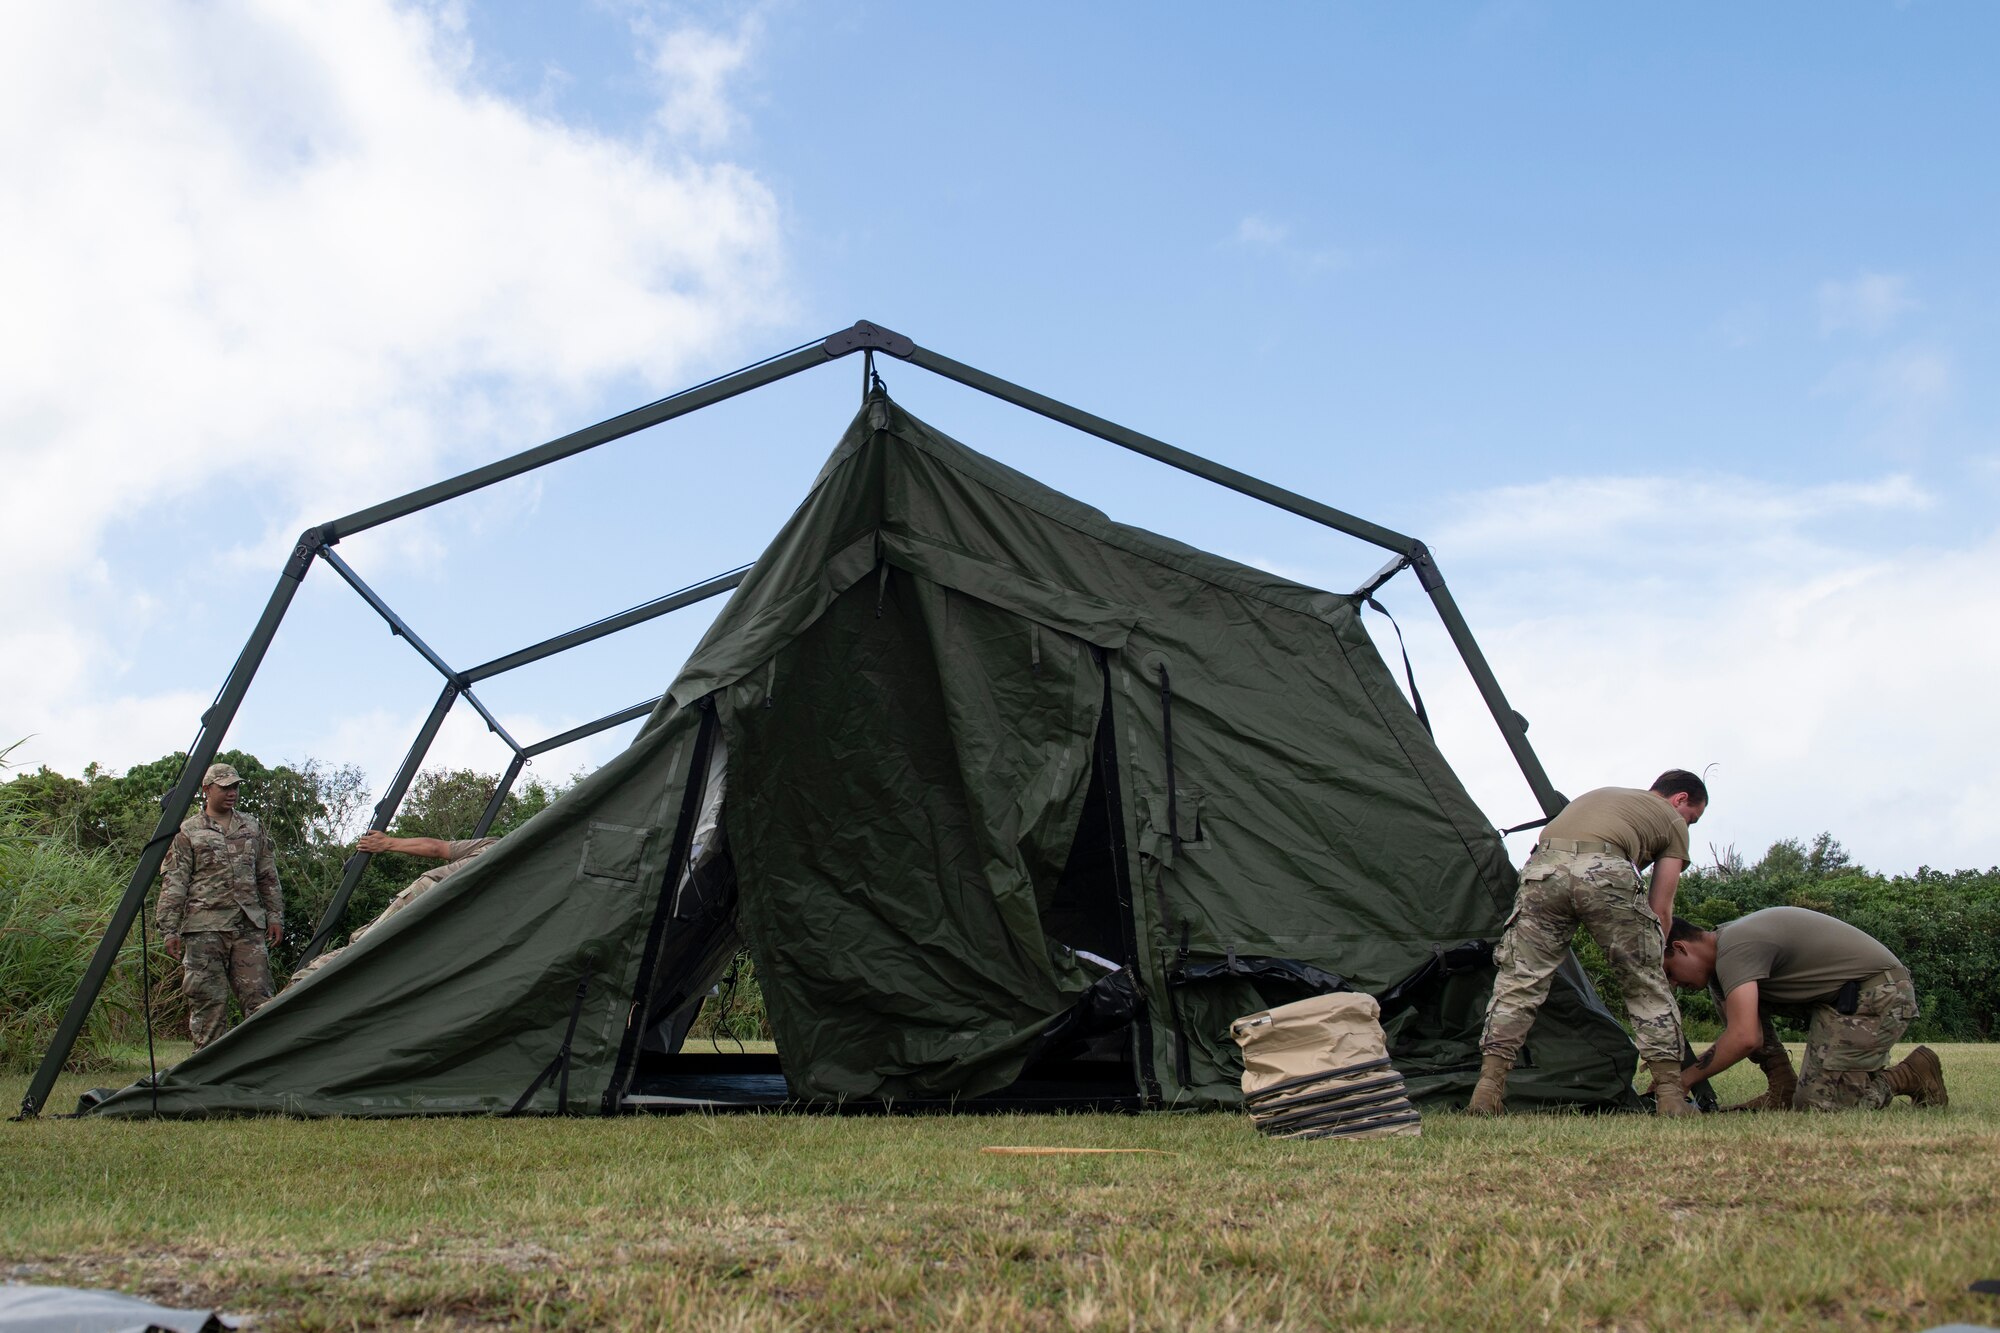 U.S. Air Force Airmen assigned to the 18th Wing set up a tent during an Agile Combat Employment exercise at Okuma Beach, Japan, Oct. 14, 2022. The ACE concept is centered around minimizing the reliance on prepared airfields by enabling the dispersal of smaller units to various locations while still meeting operational needs. (U.S. Air Force photo by Senior Airman Jessi Roth)